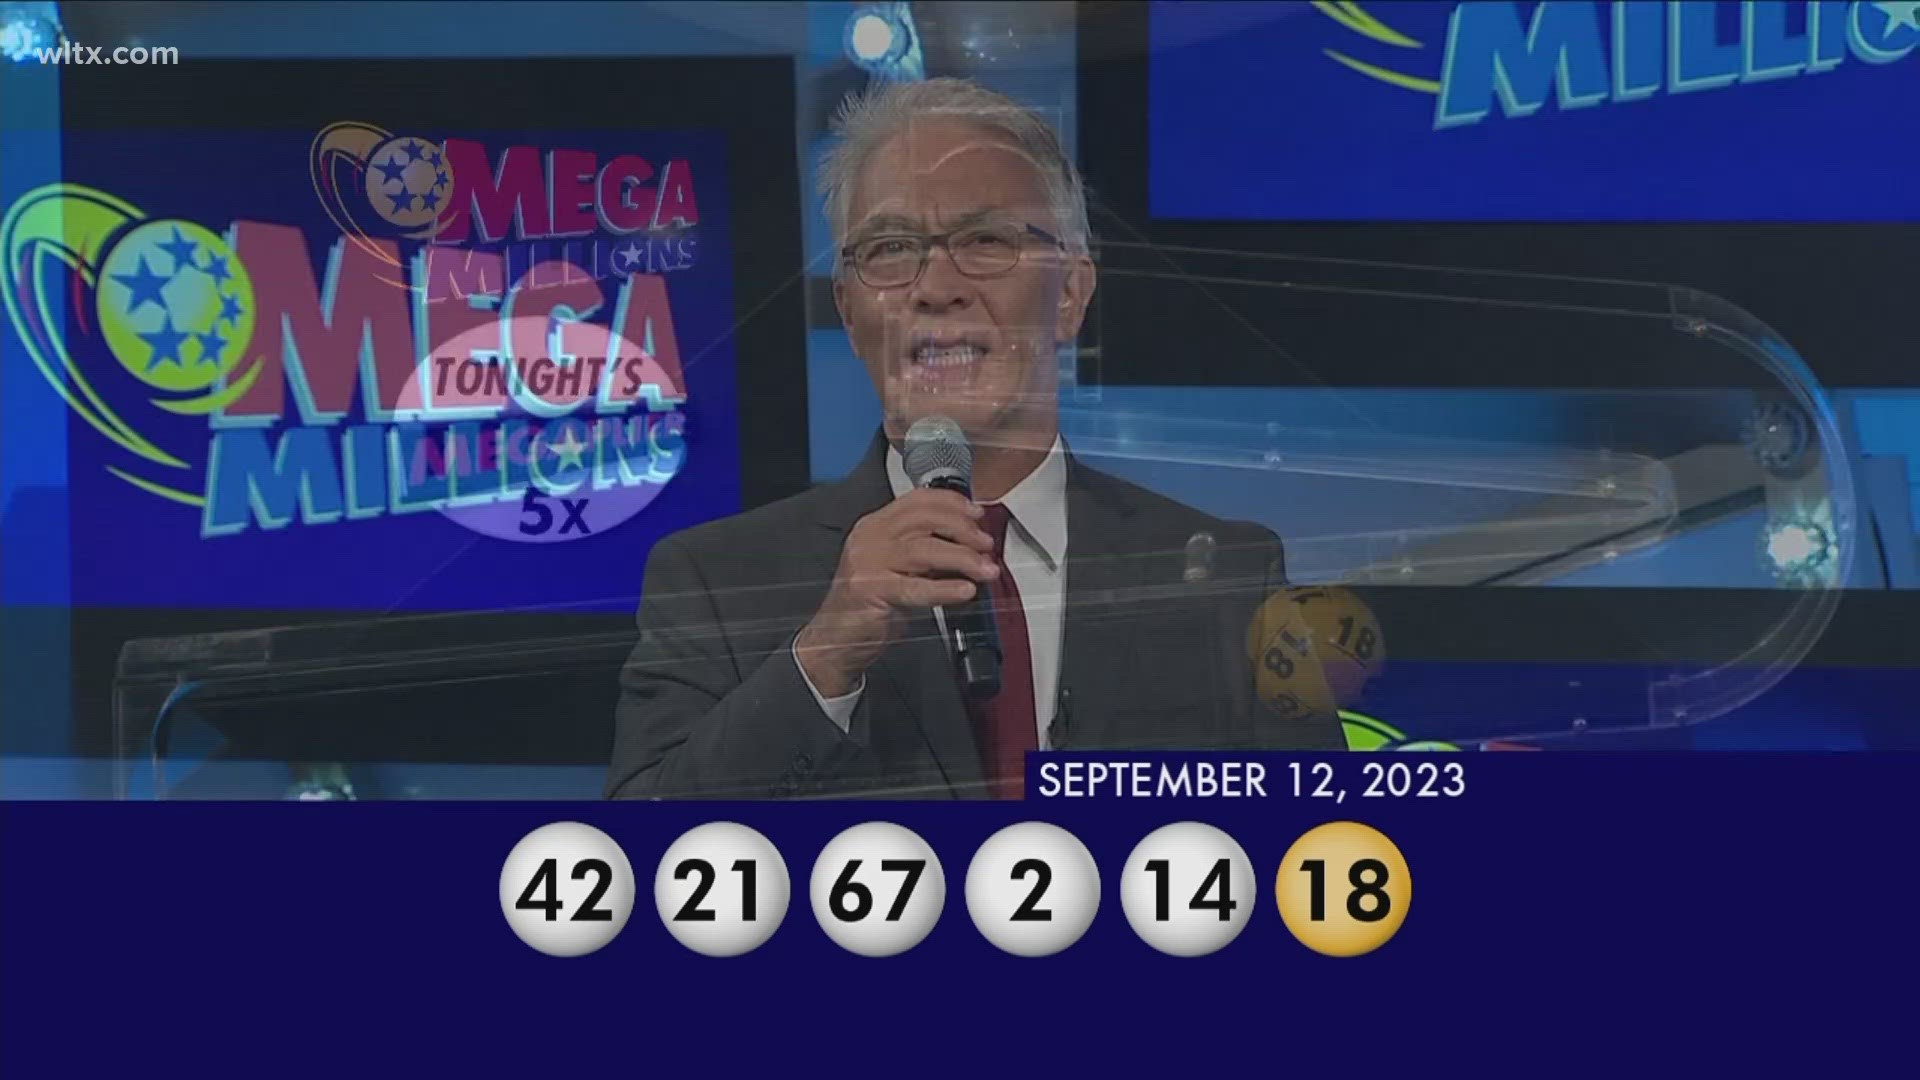 Here are the MegaMillions winning numbers for September 12, 2023.